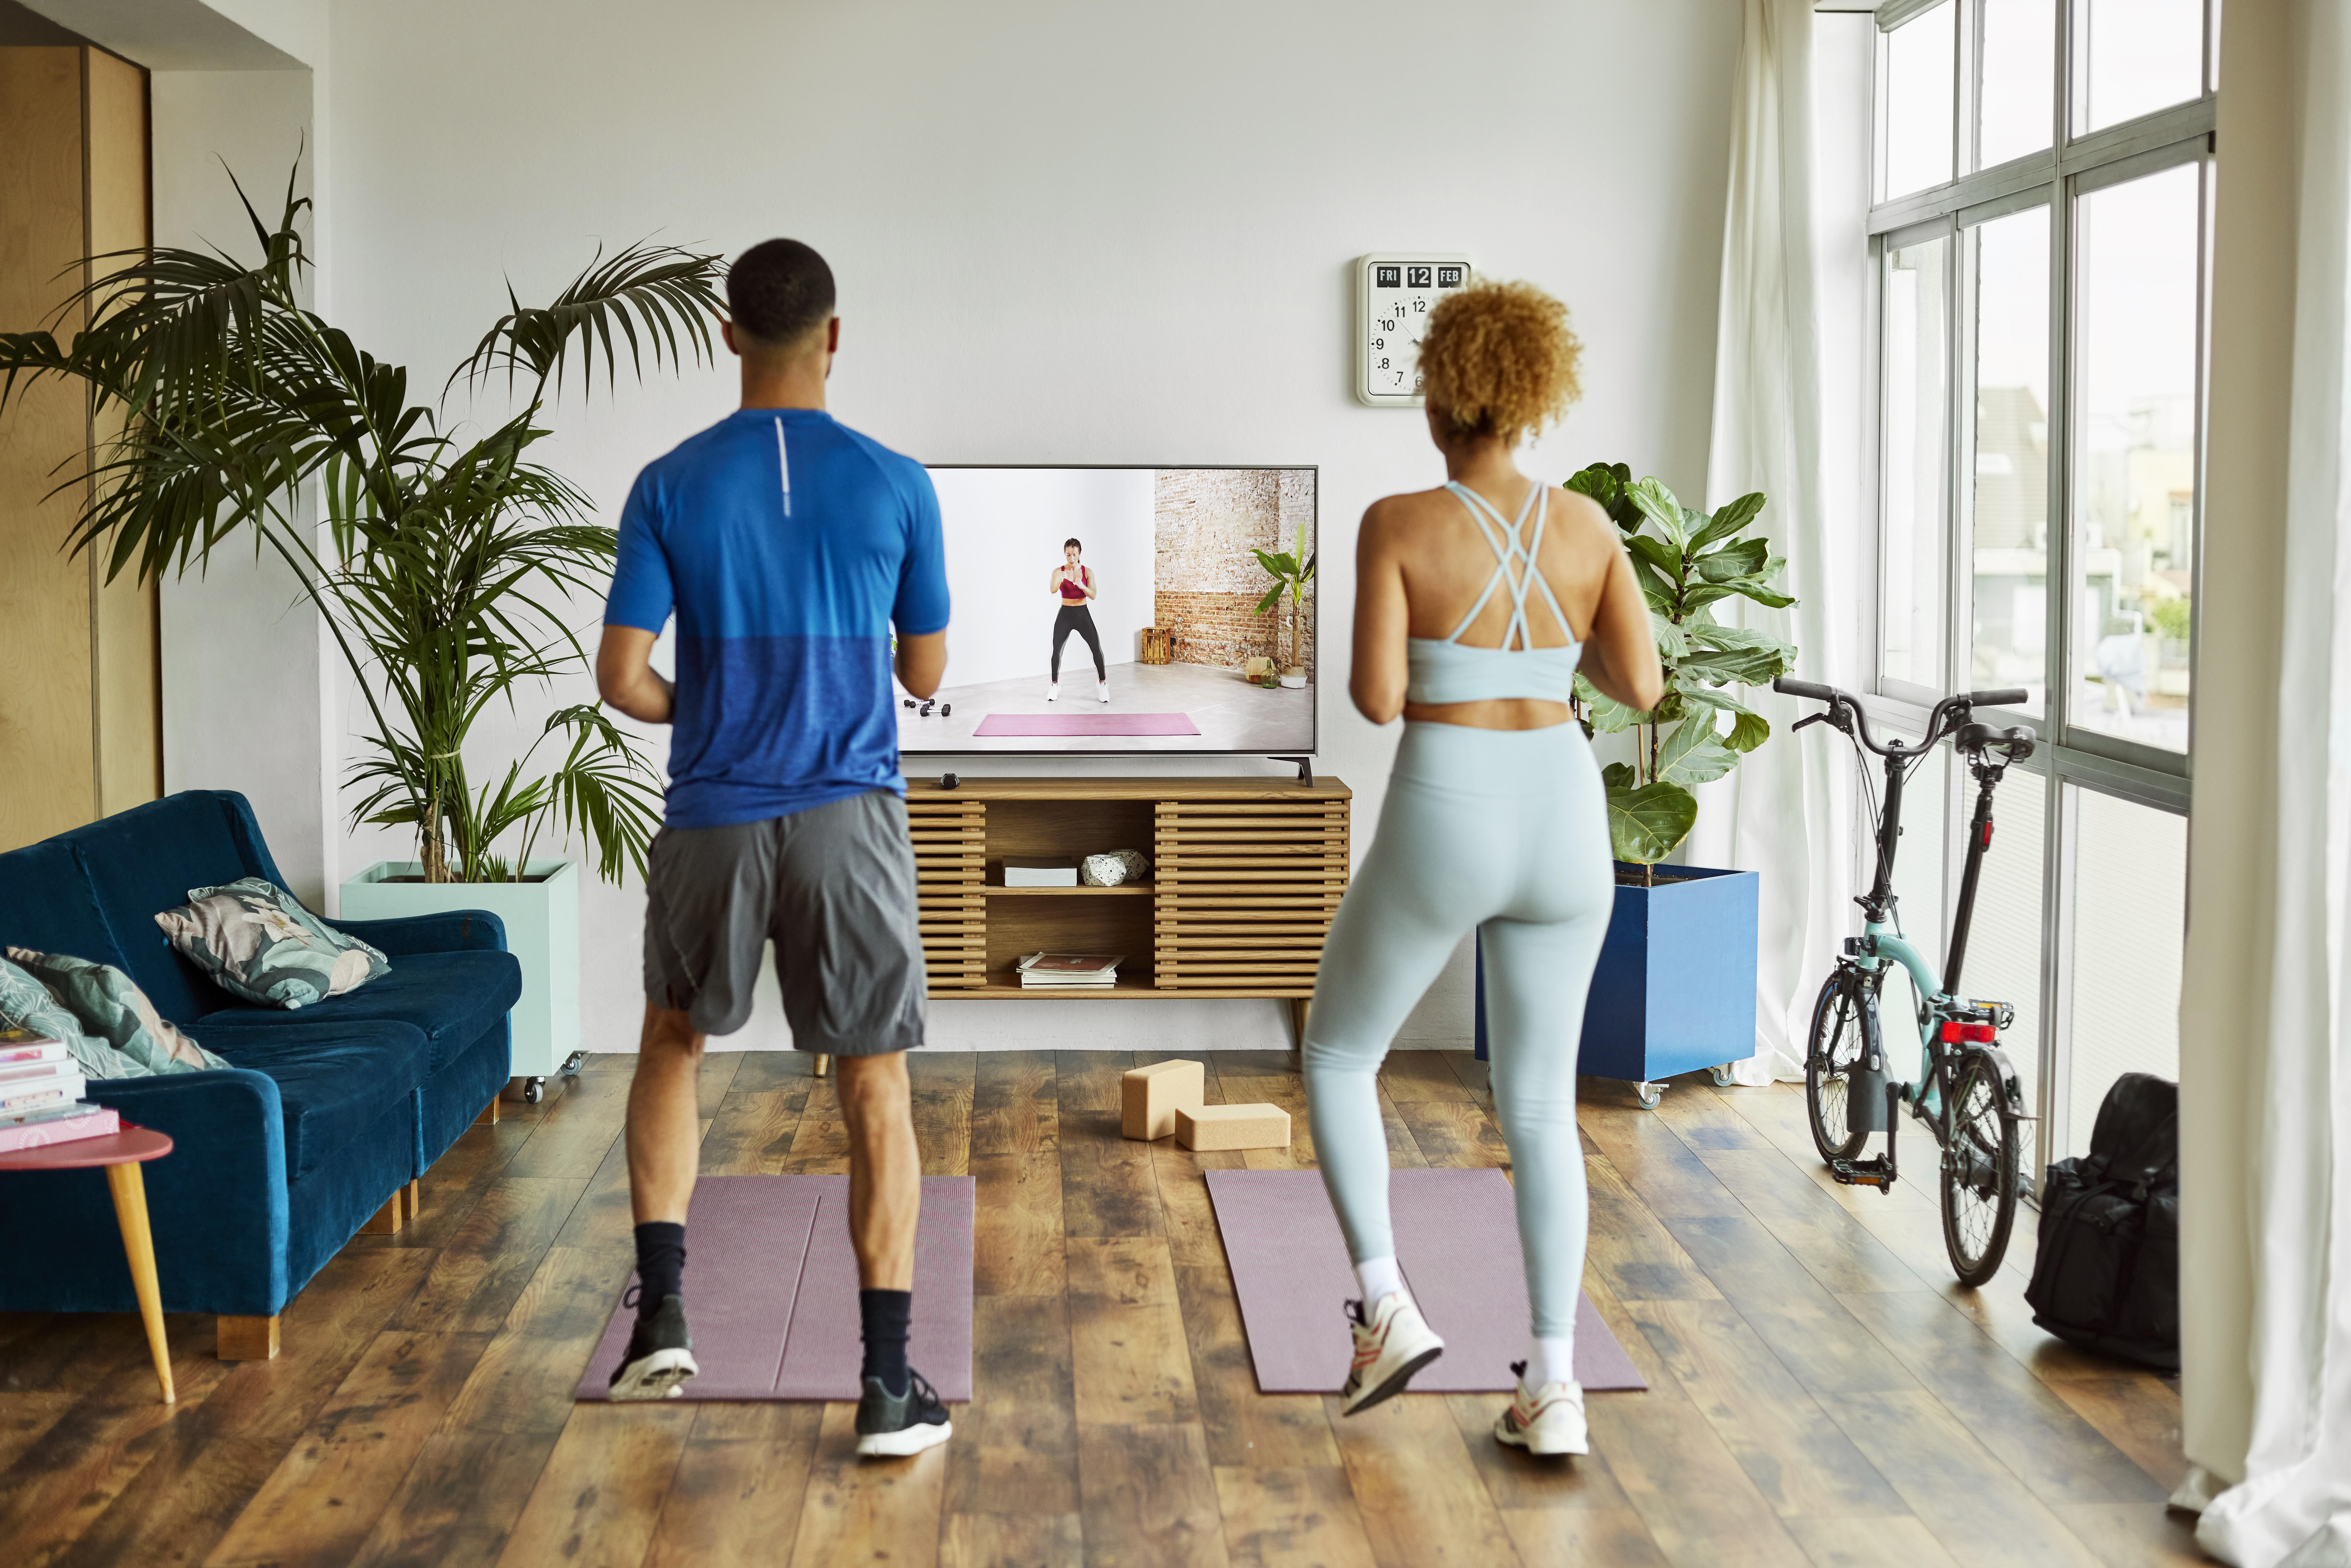 Peloton, ClassPass, Obe Fitness: Which fitness subscriptions are worth the money?